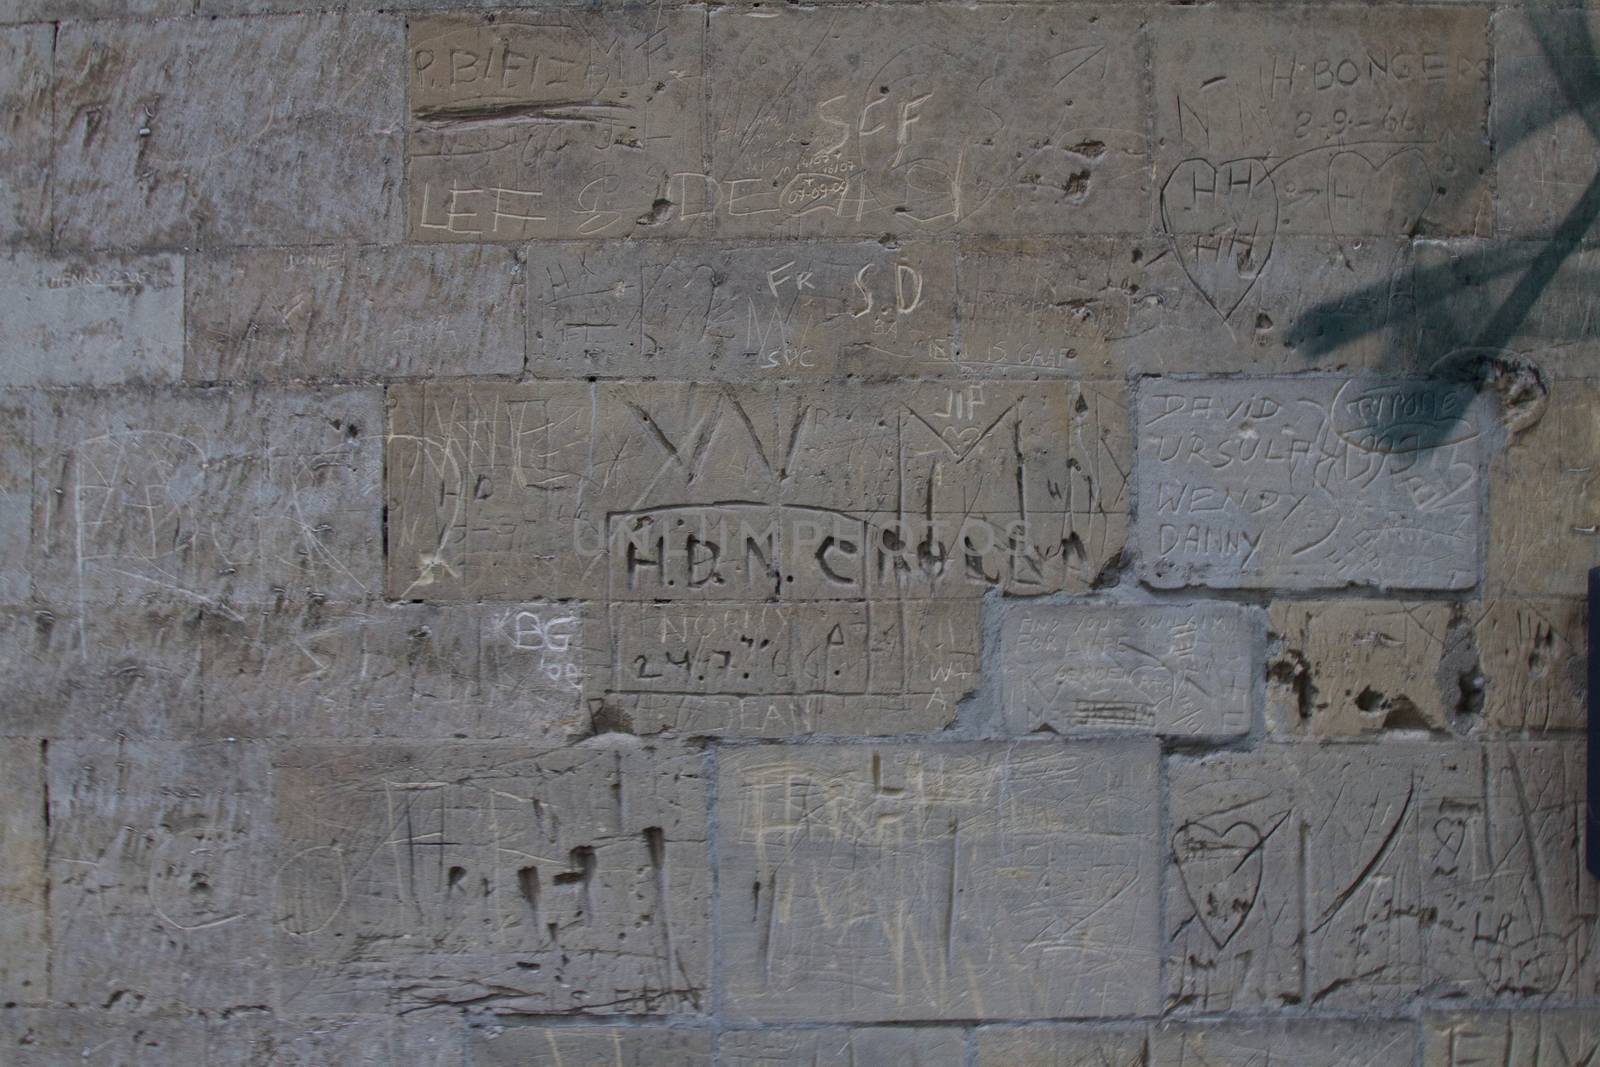 Engraved or Carved Graffiti on a Stone Wall